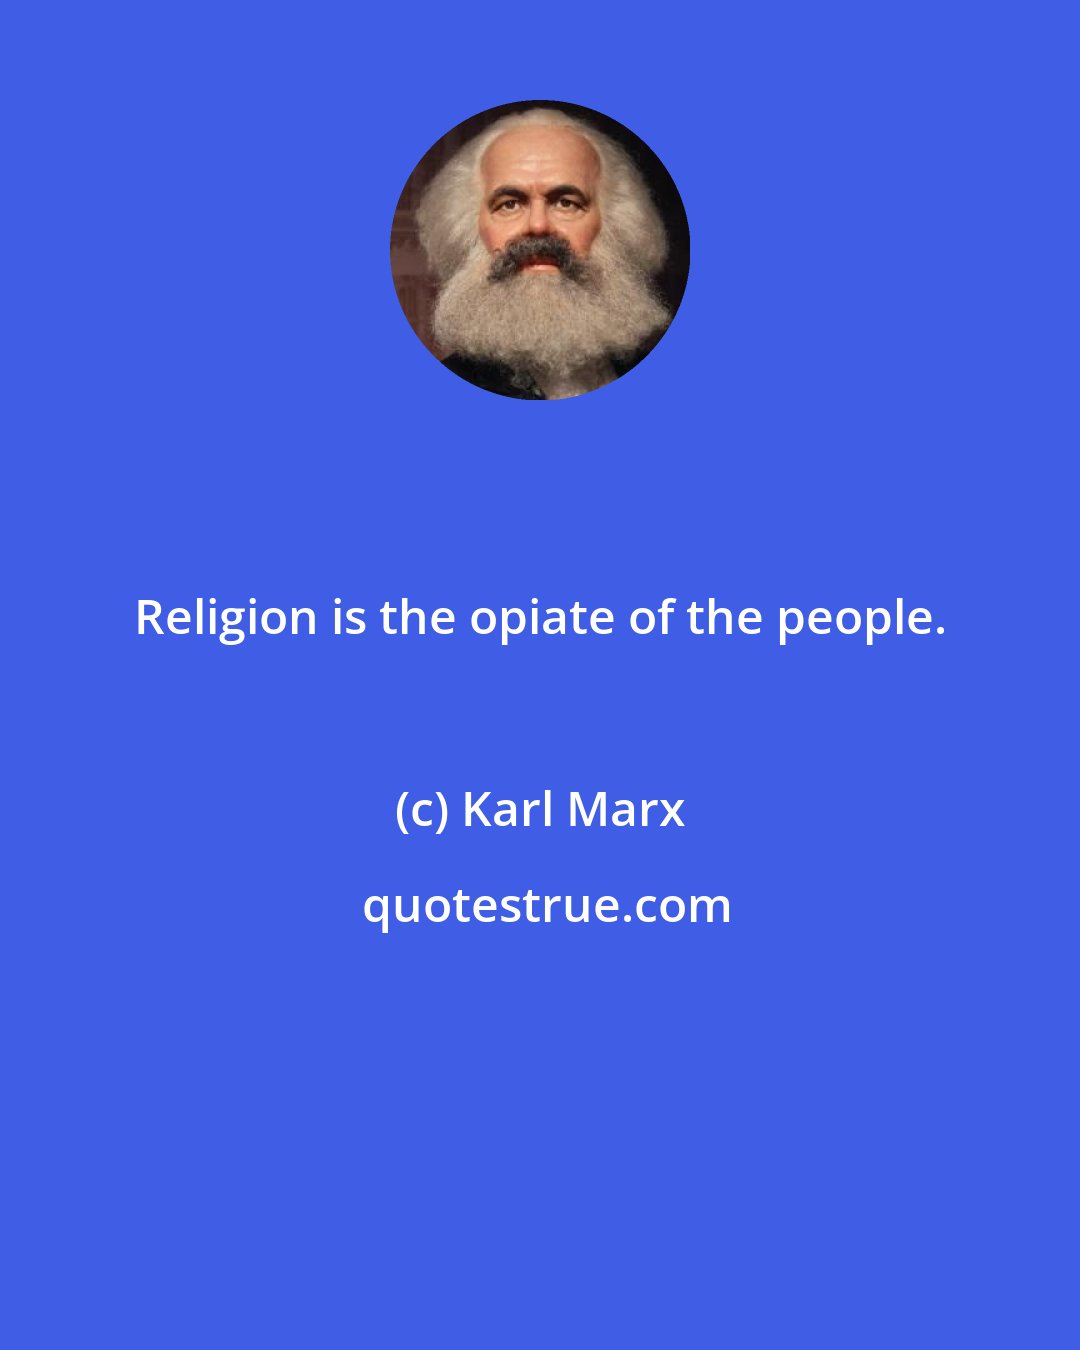 Karl Marx: Religion is the opiate of the people.